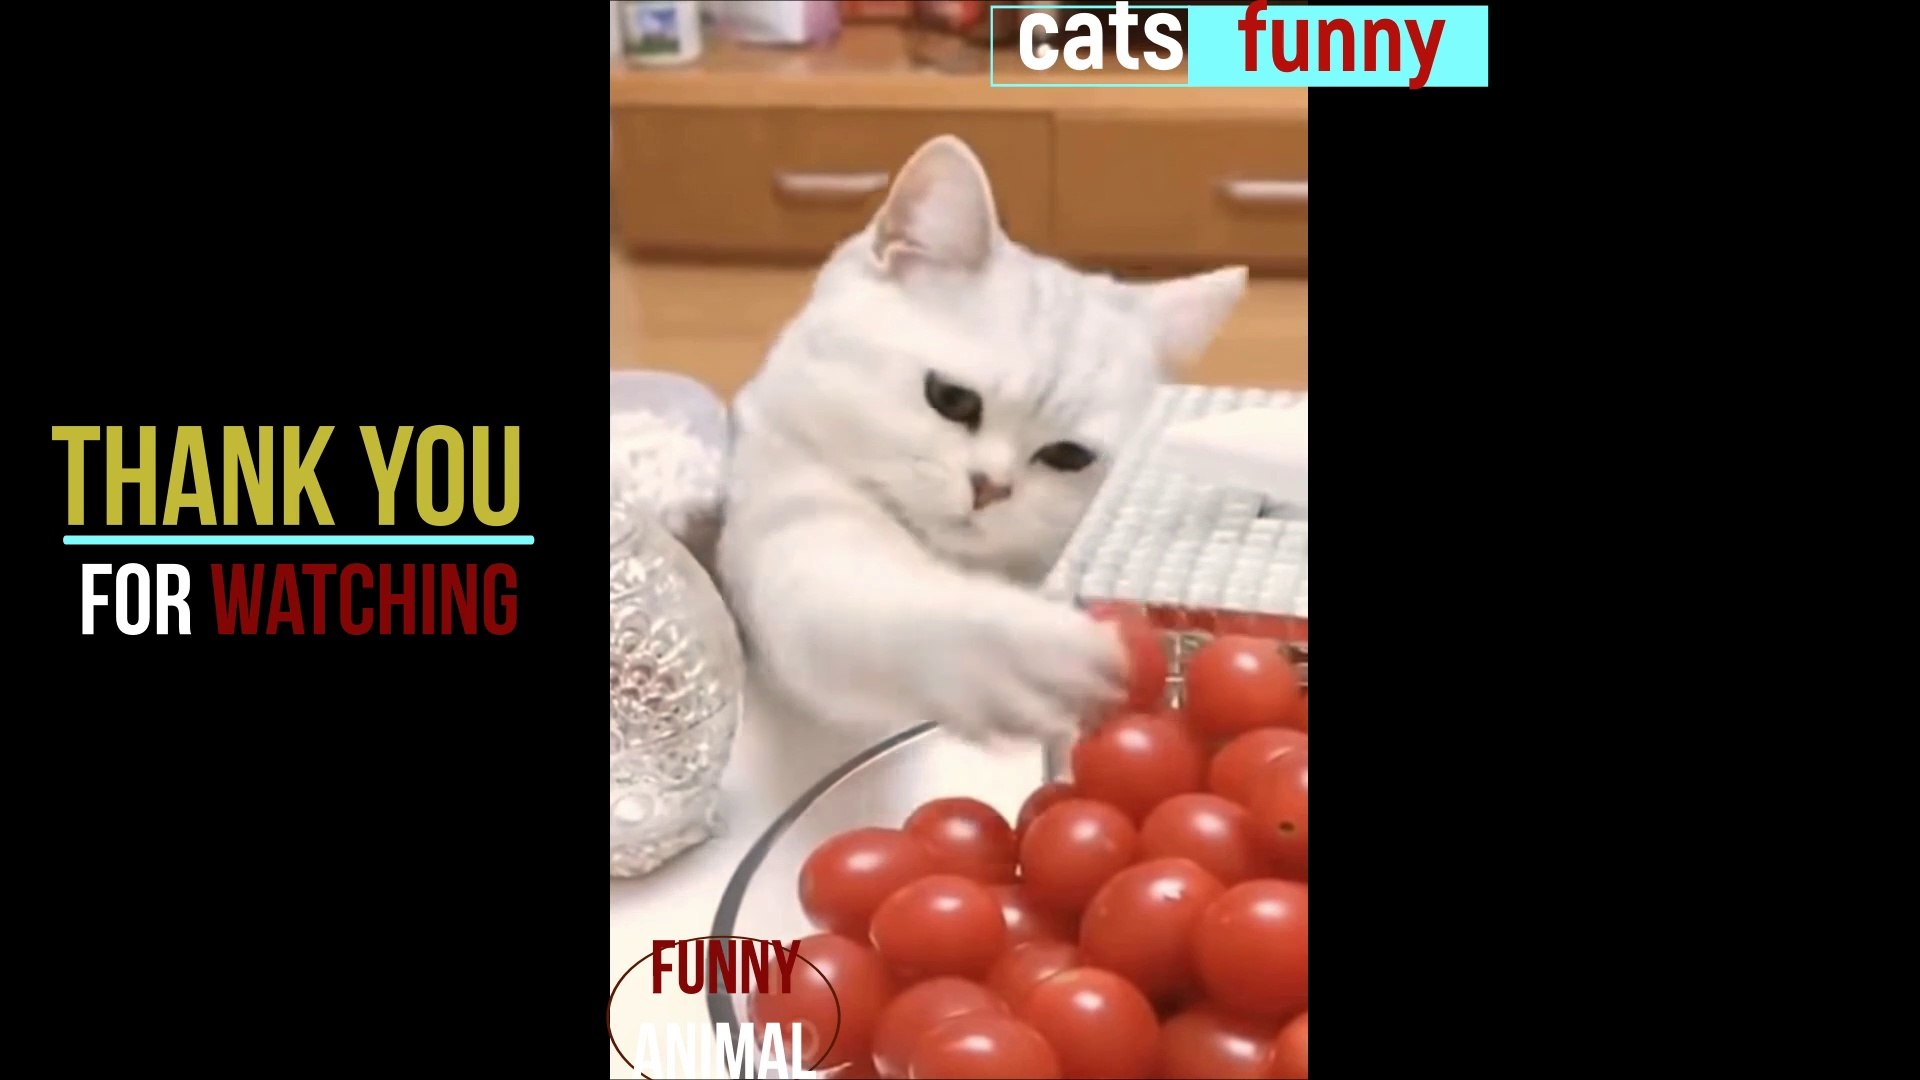 Fun Animals Do Not Stop At Active Cats And Dogs Comedy At Home Funny Animal 12 Video Dailymotion